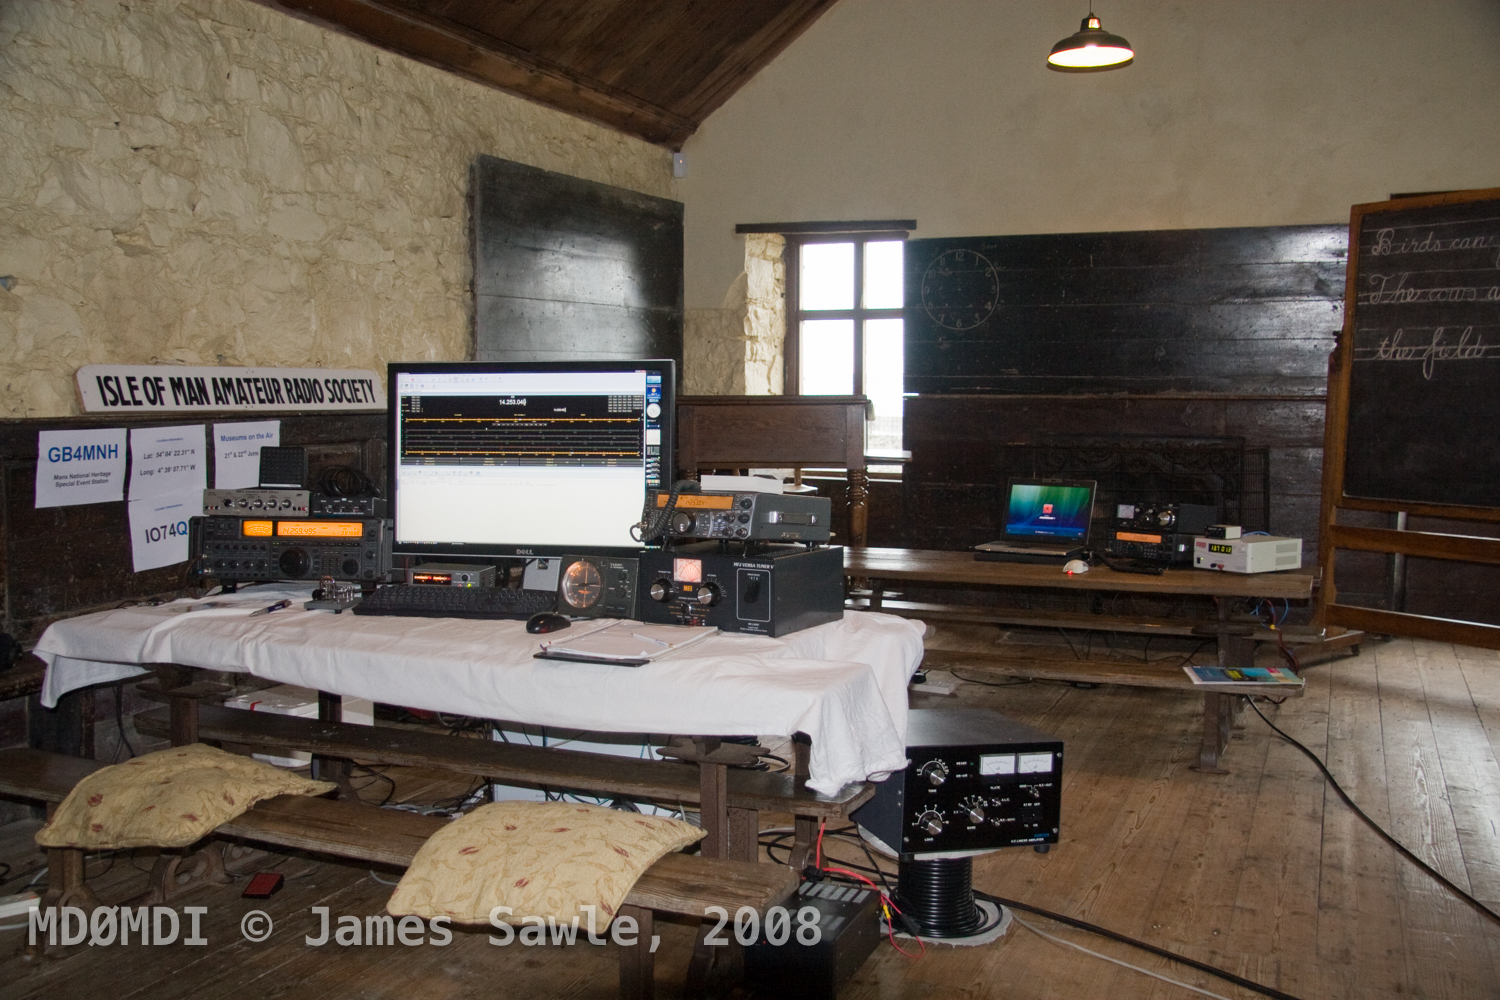 We managed to setup 3 working stations in the comfort of the Old Grammar School for GB4MNH